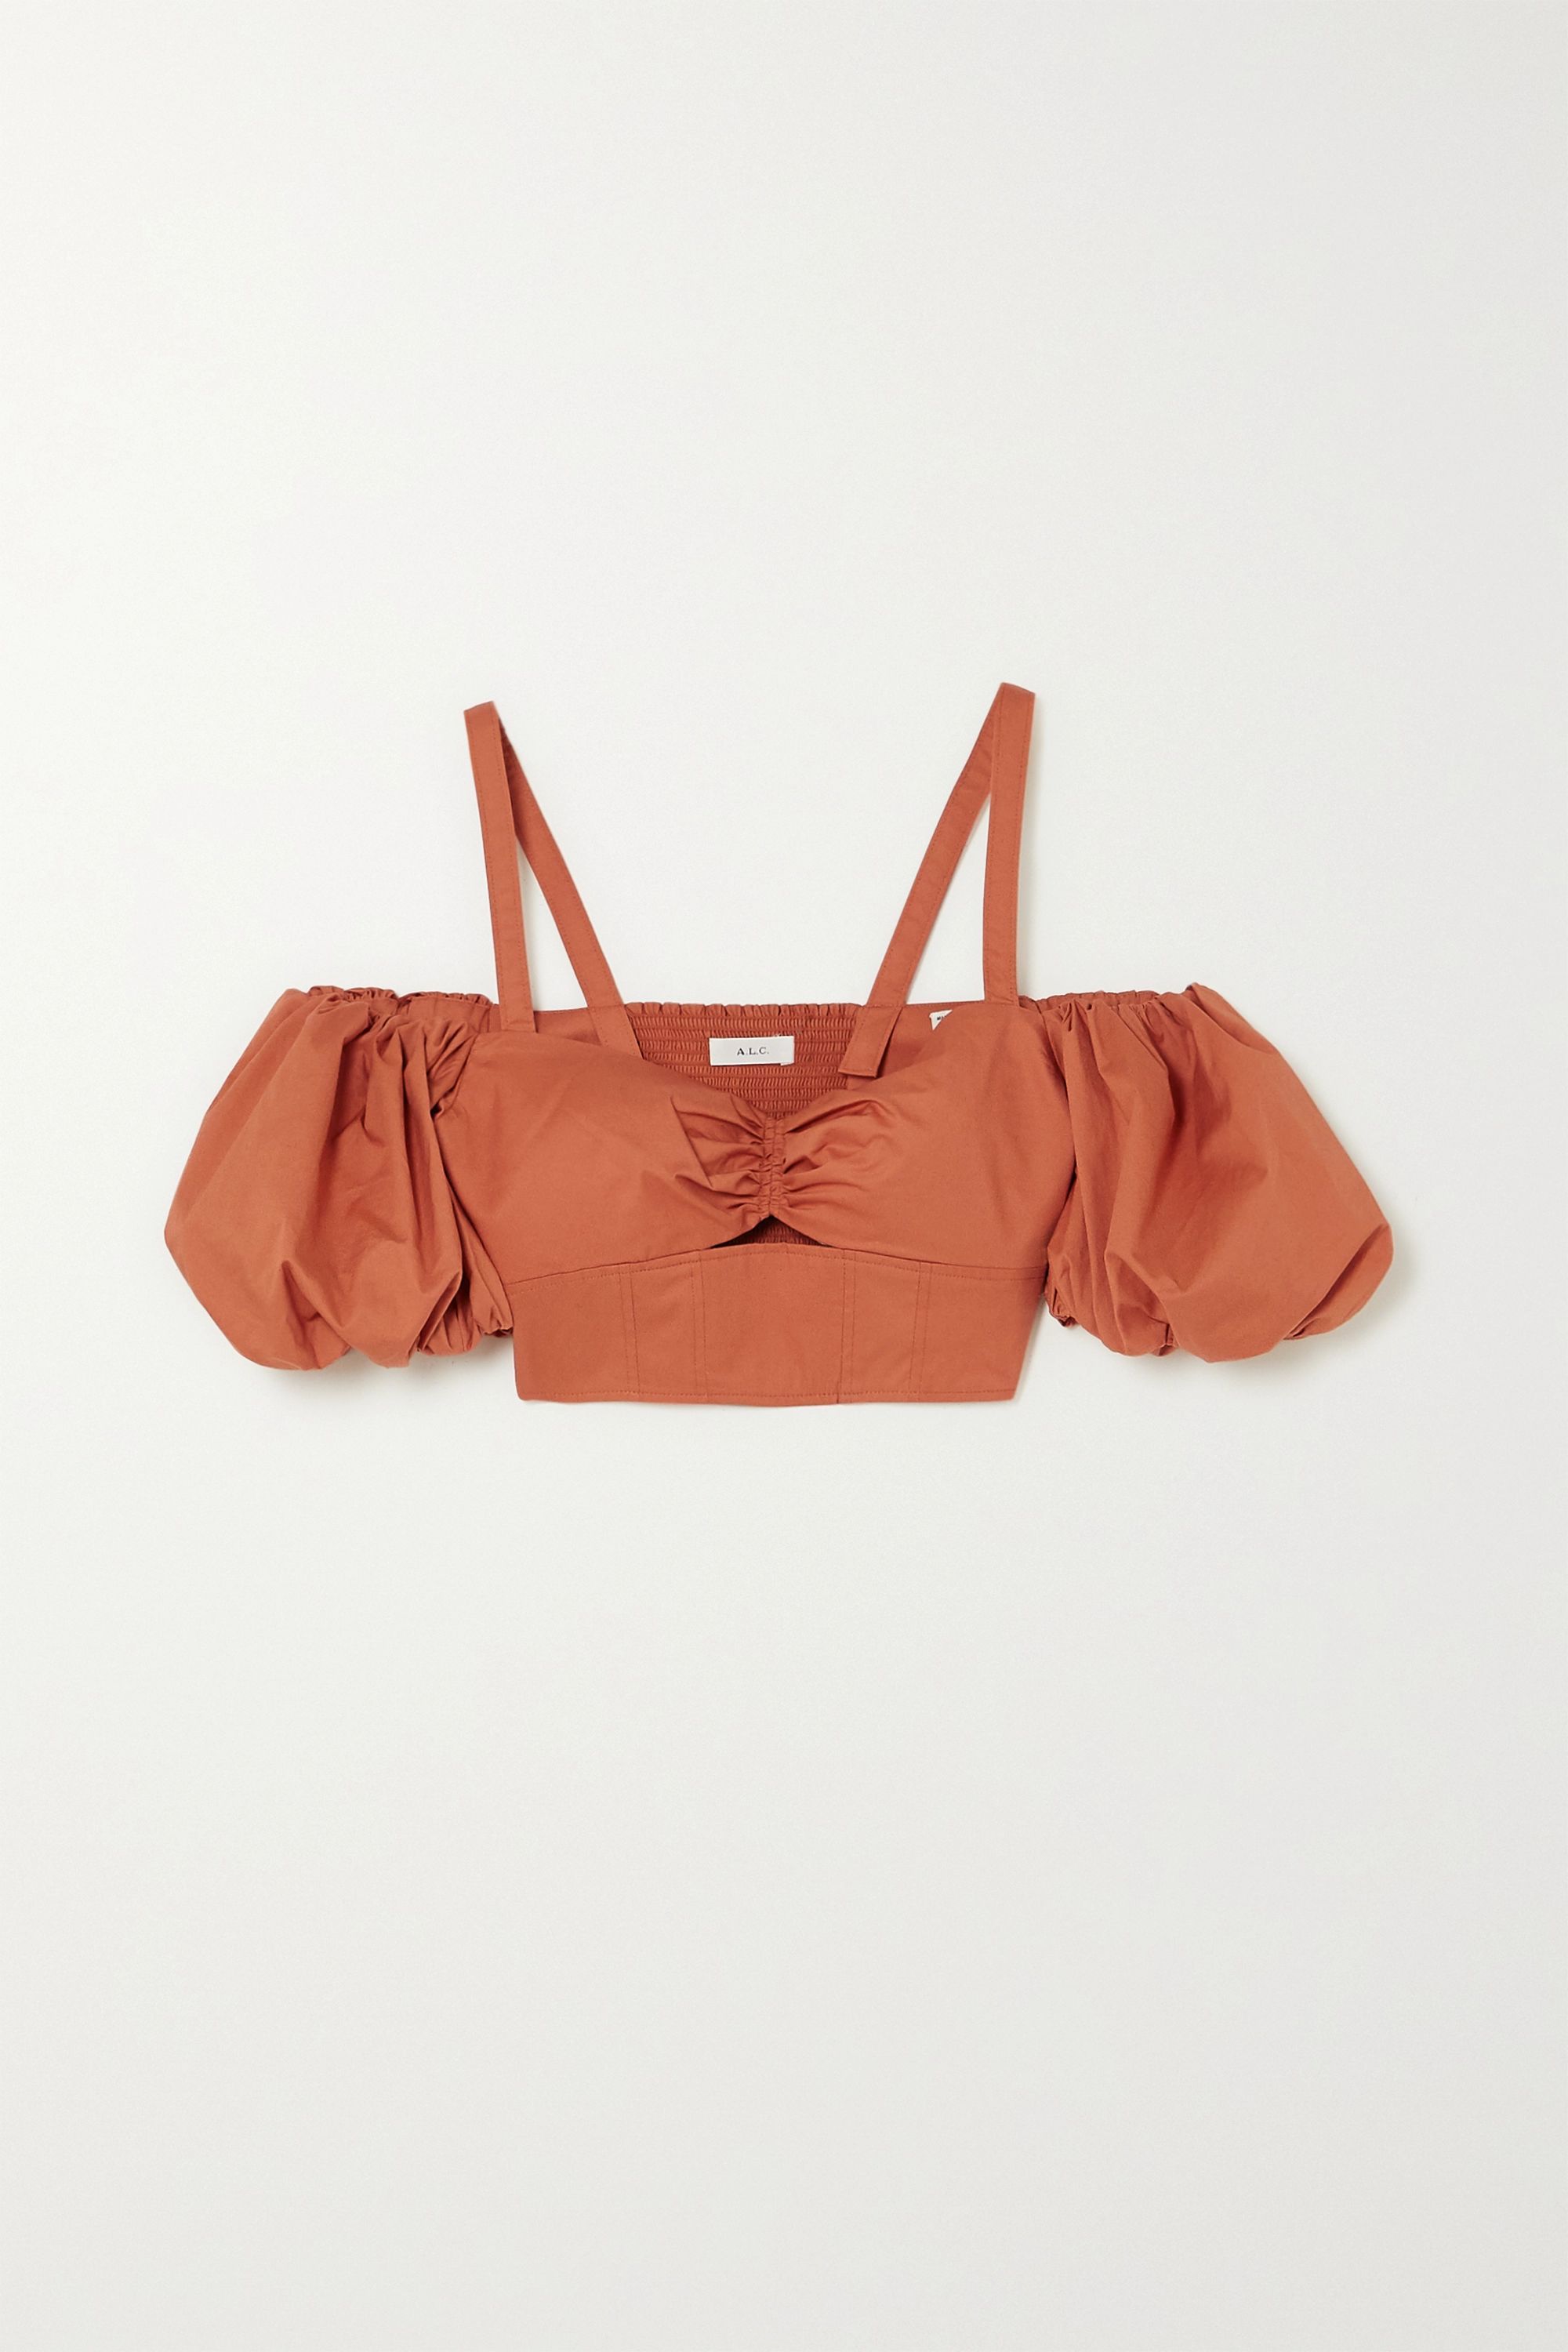 A.L.C. x Petra Flannery Melody cold-shoulder cropped cotton-blend poplin top | NET-A-PORTER (US)